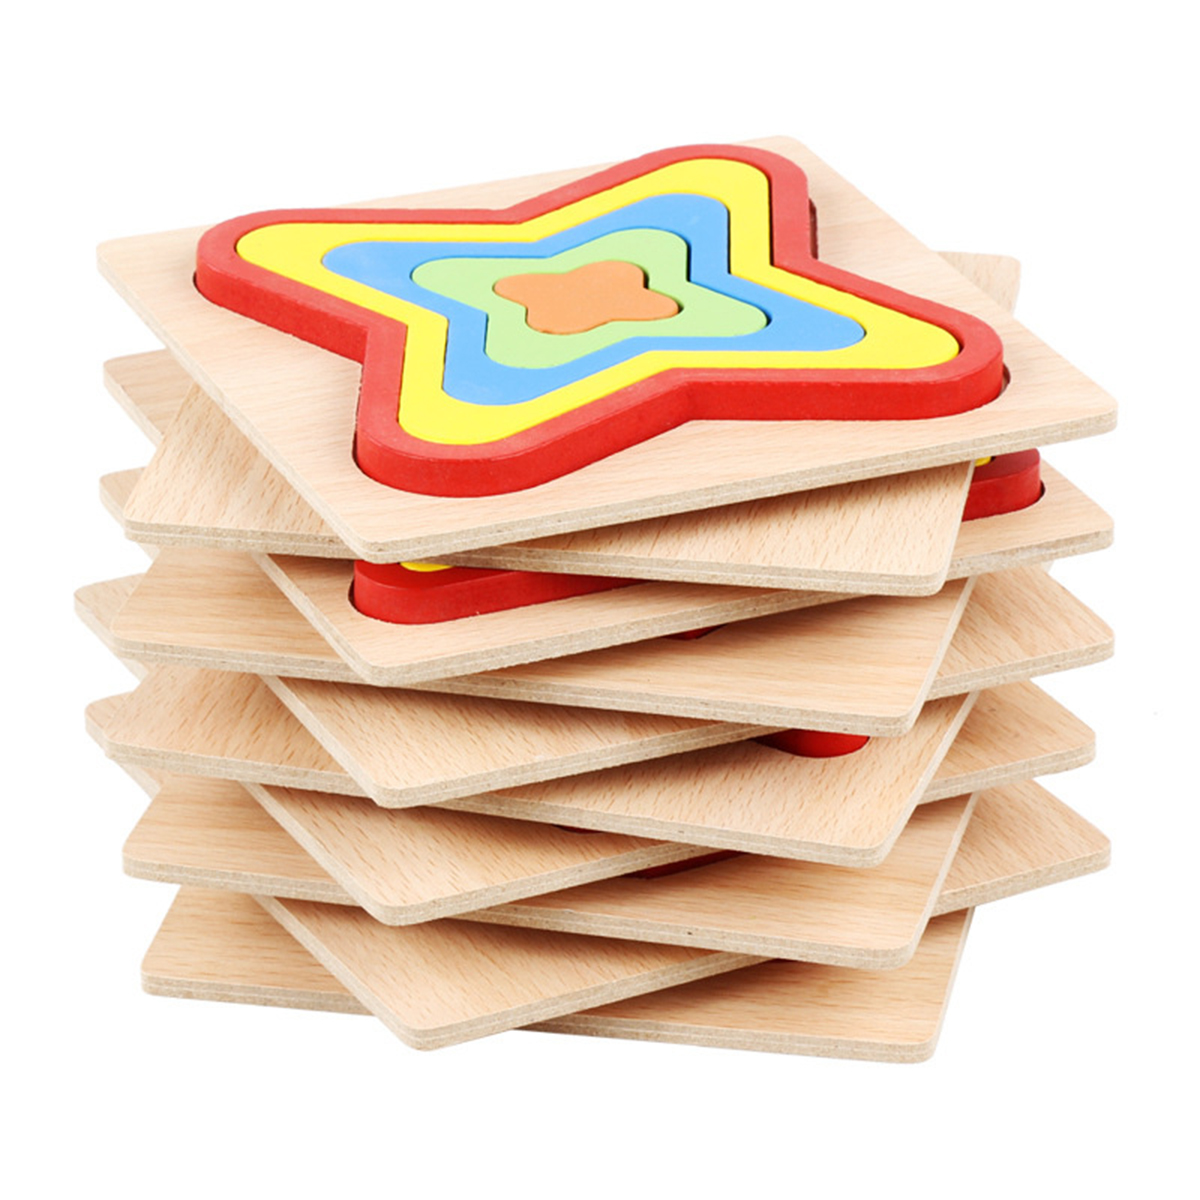 Shape Cognition Board Geometry Jigsaw Puzzle Wooden Kids Educational Learning Toys 11